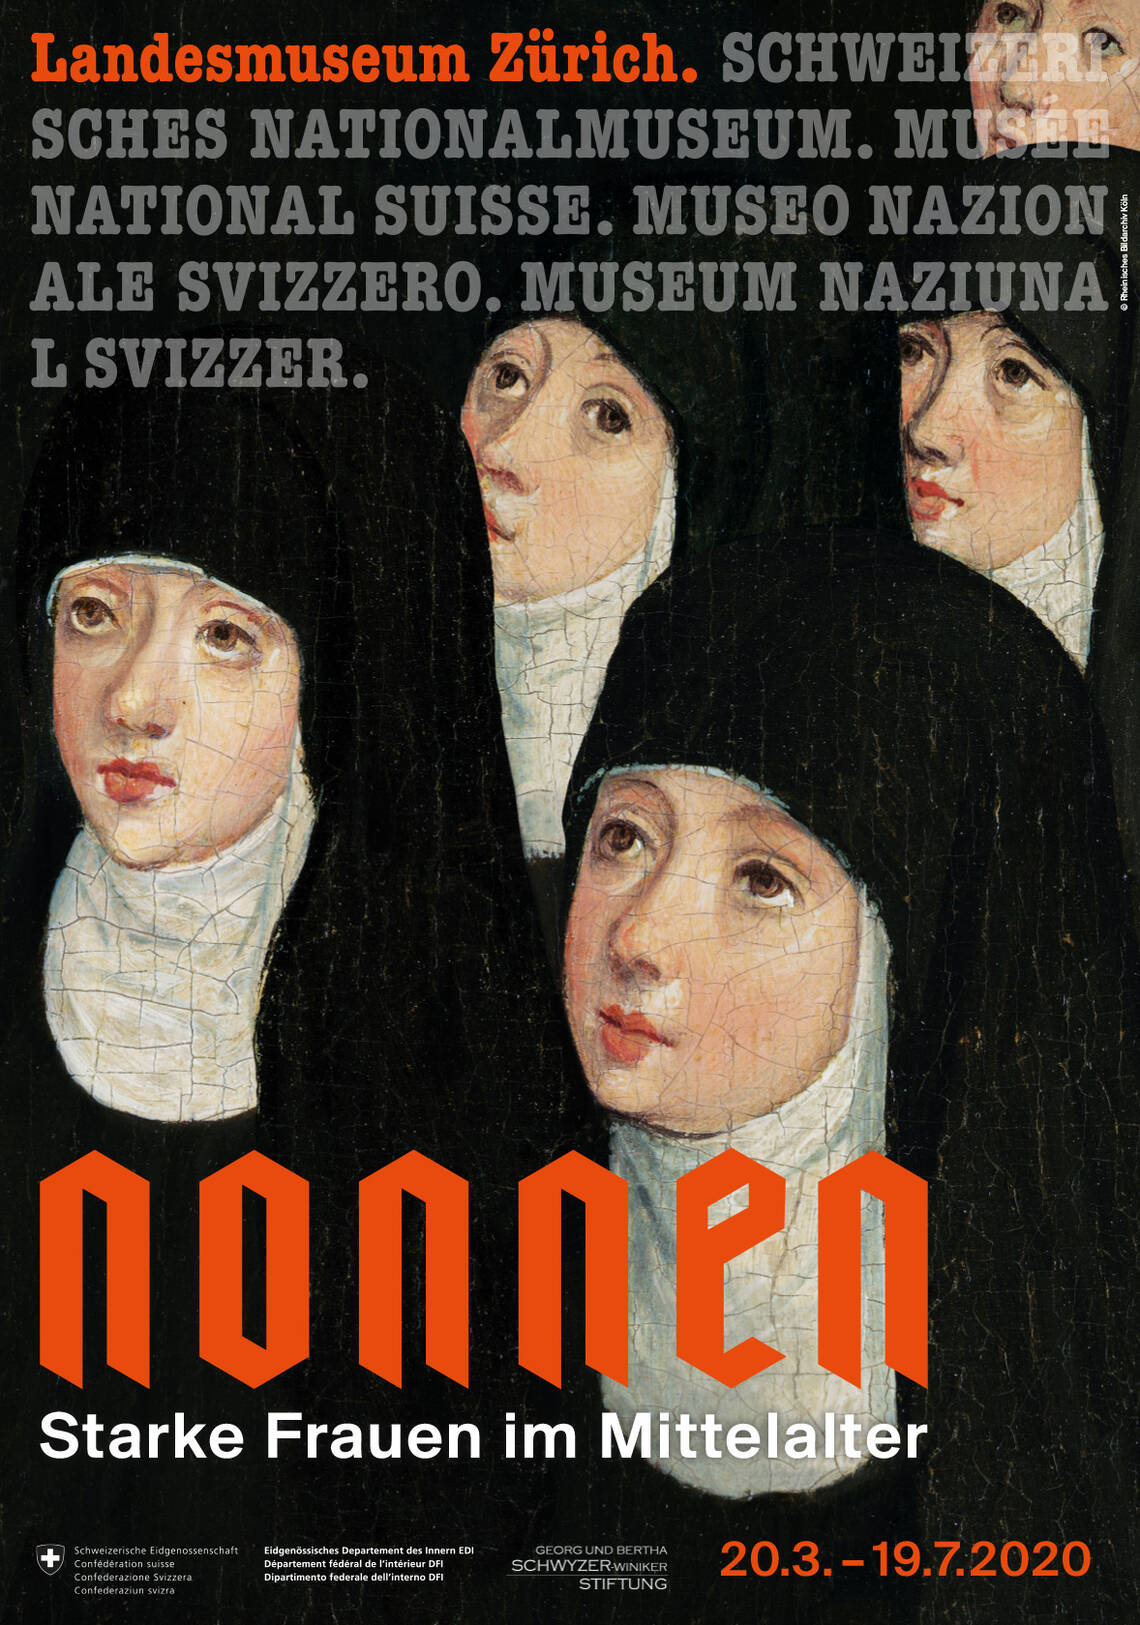 Poster of the exhibition "Nuns in the Middle Ages